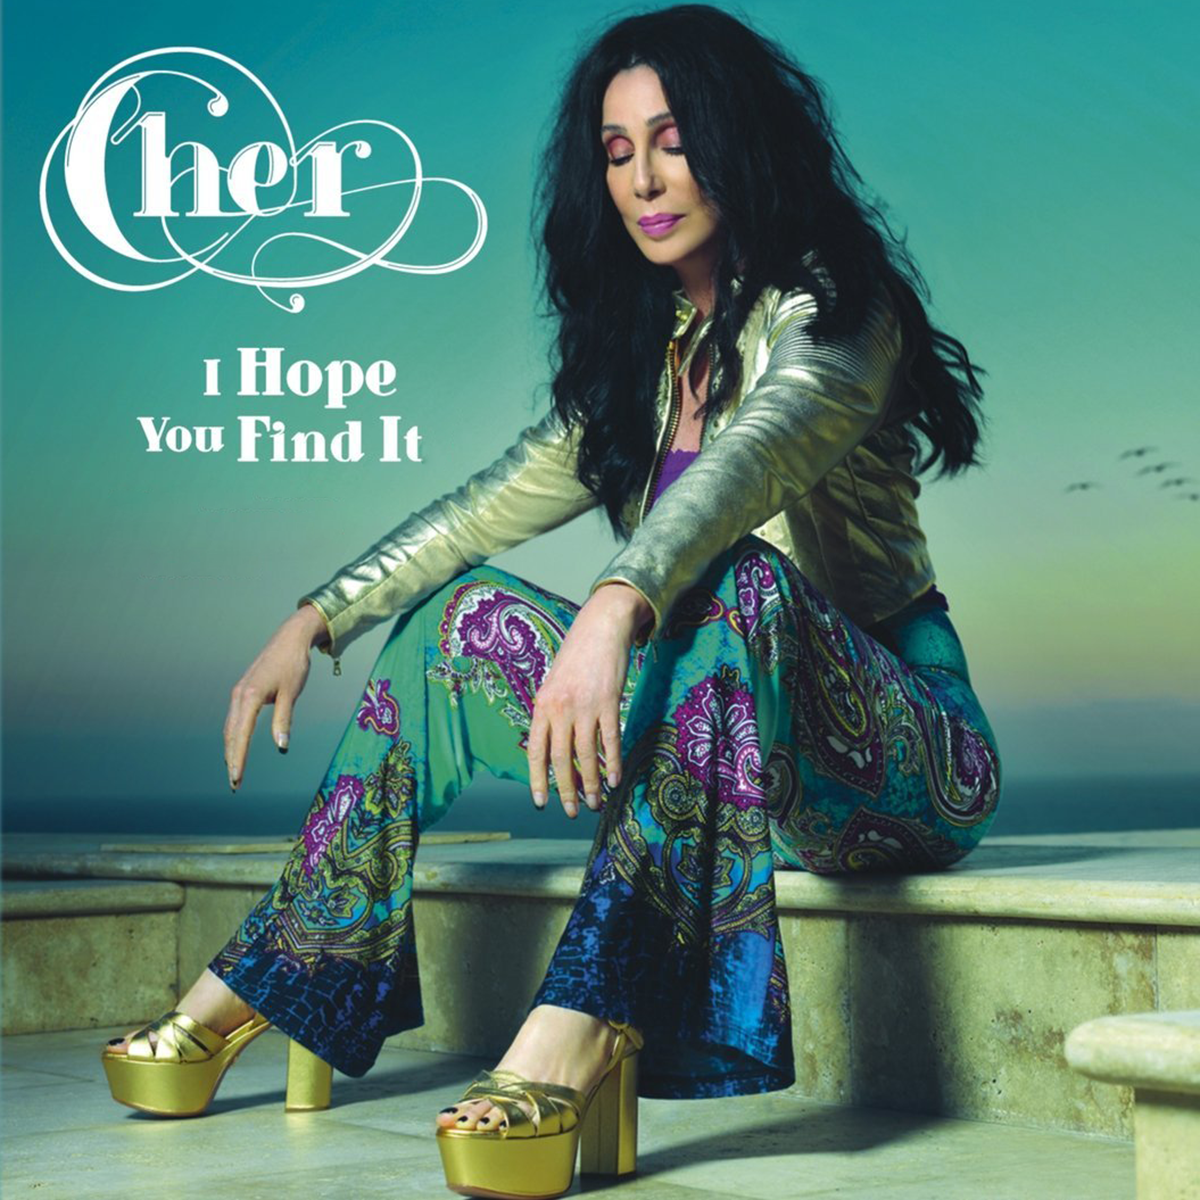 themusik_cher_i_hope_you_find_it_testo_traduzione_video.png